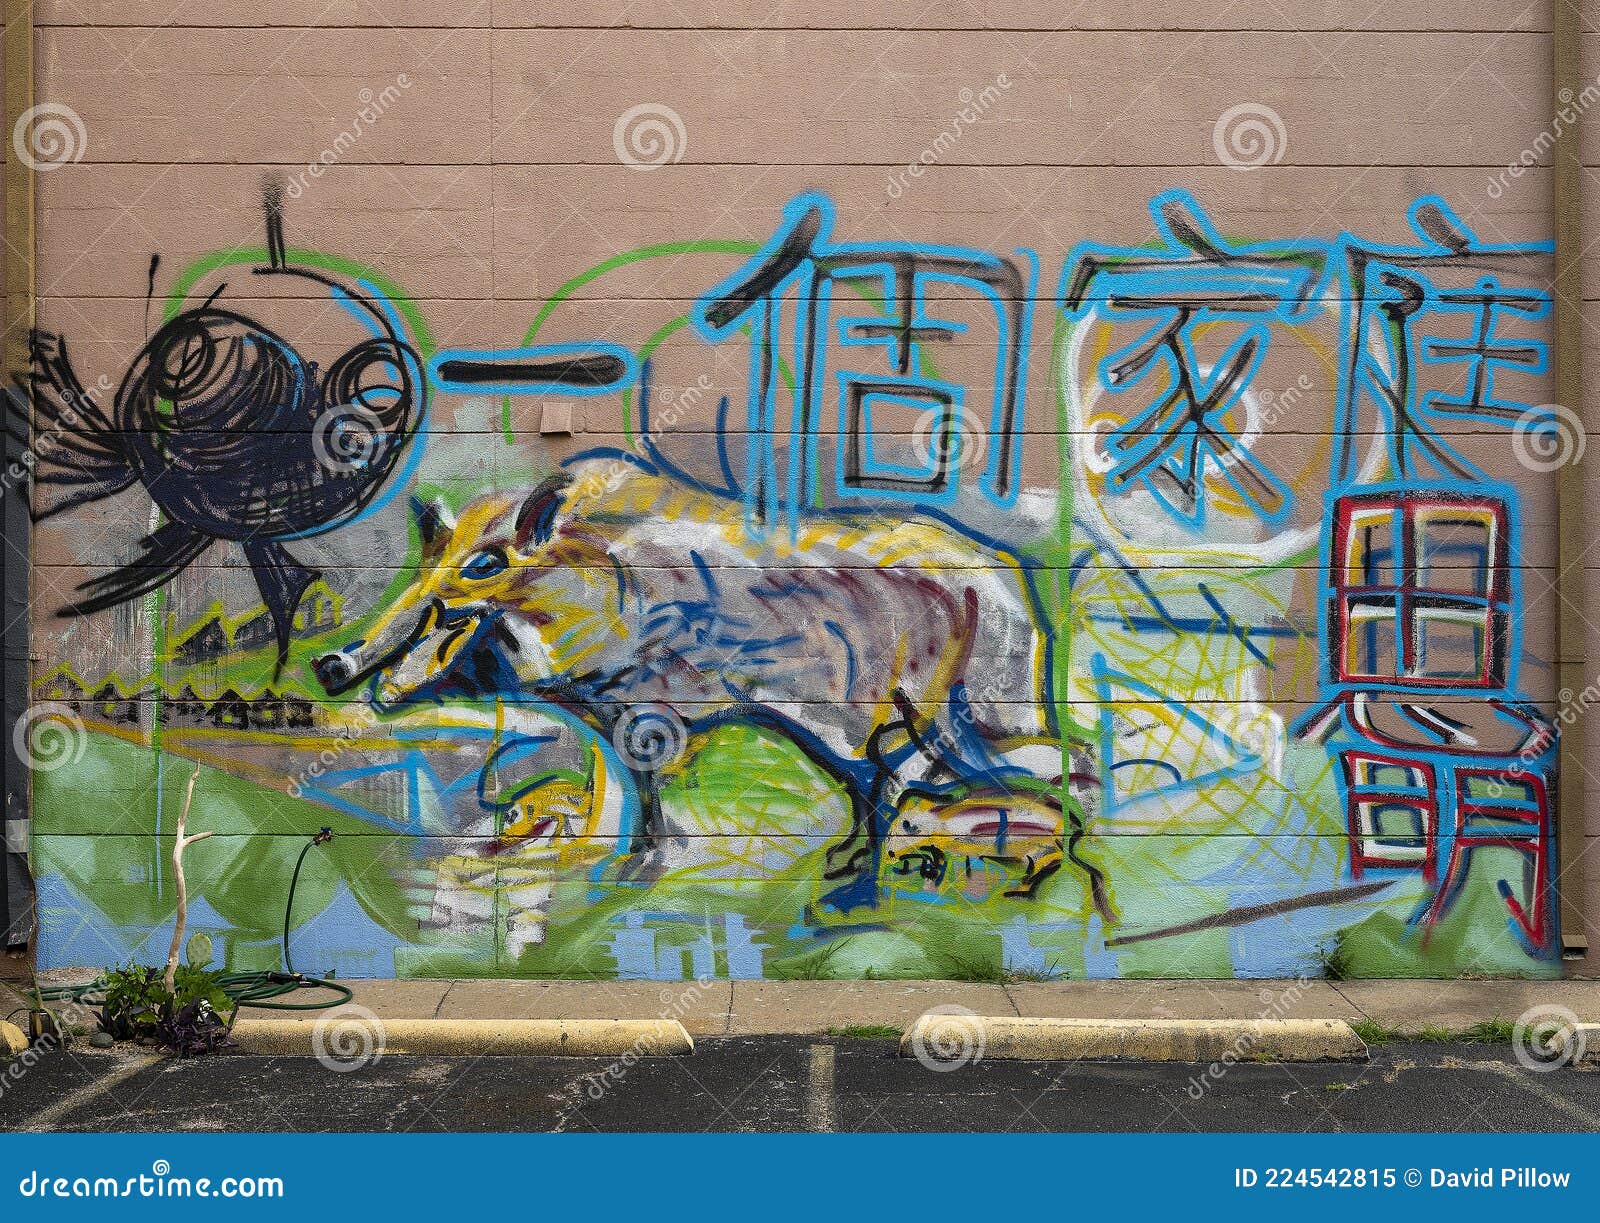 graffiti style street art mural with a pig family on a building in arlington, texas.